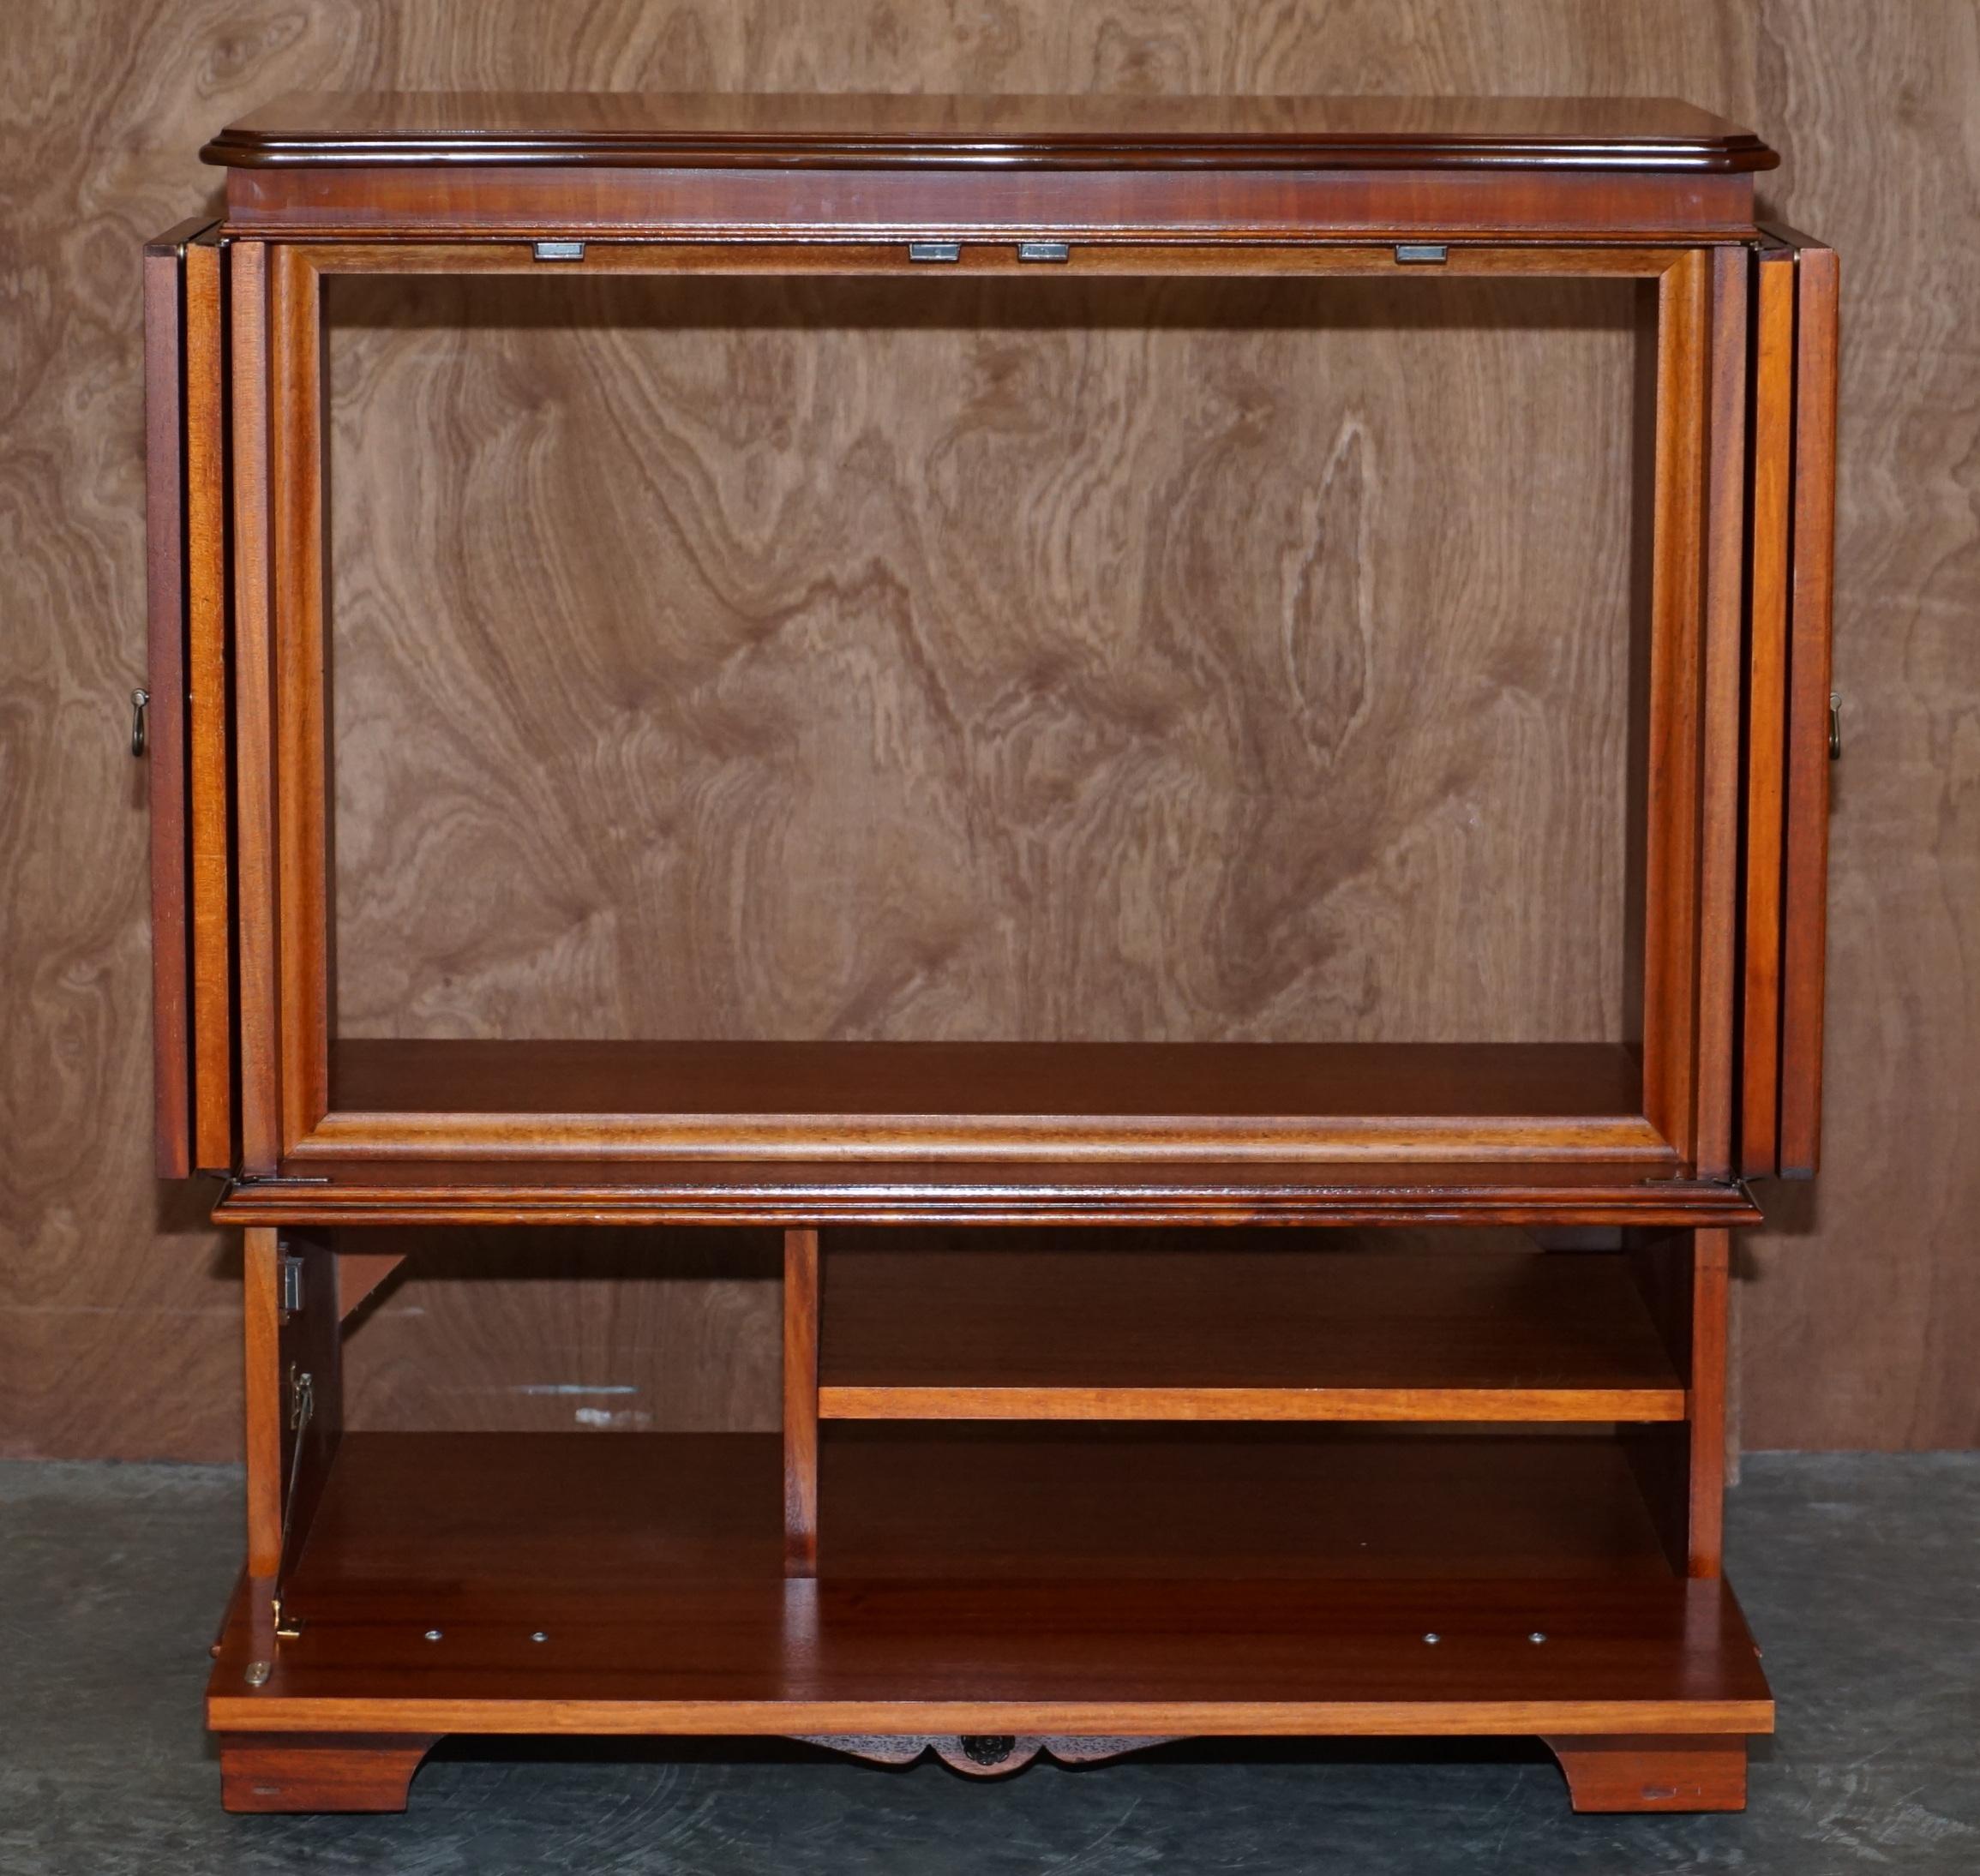 Stunning Burr Yew Wood TV Media Cupboard Designed to House Television & Boxes For Sale 5